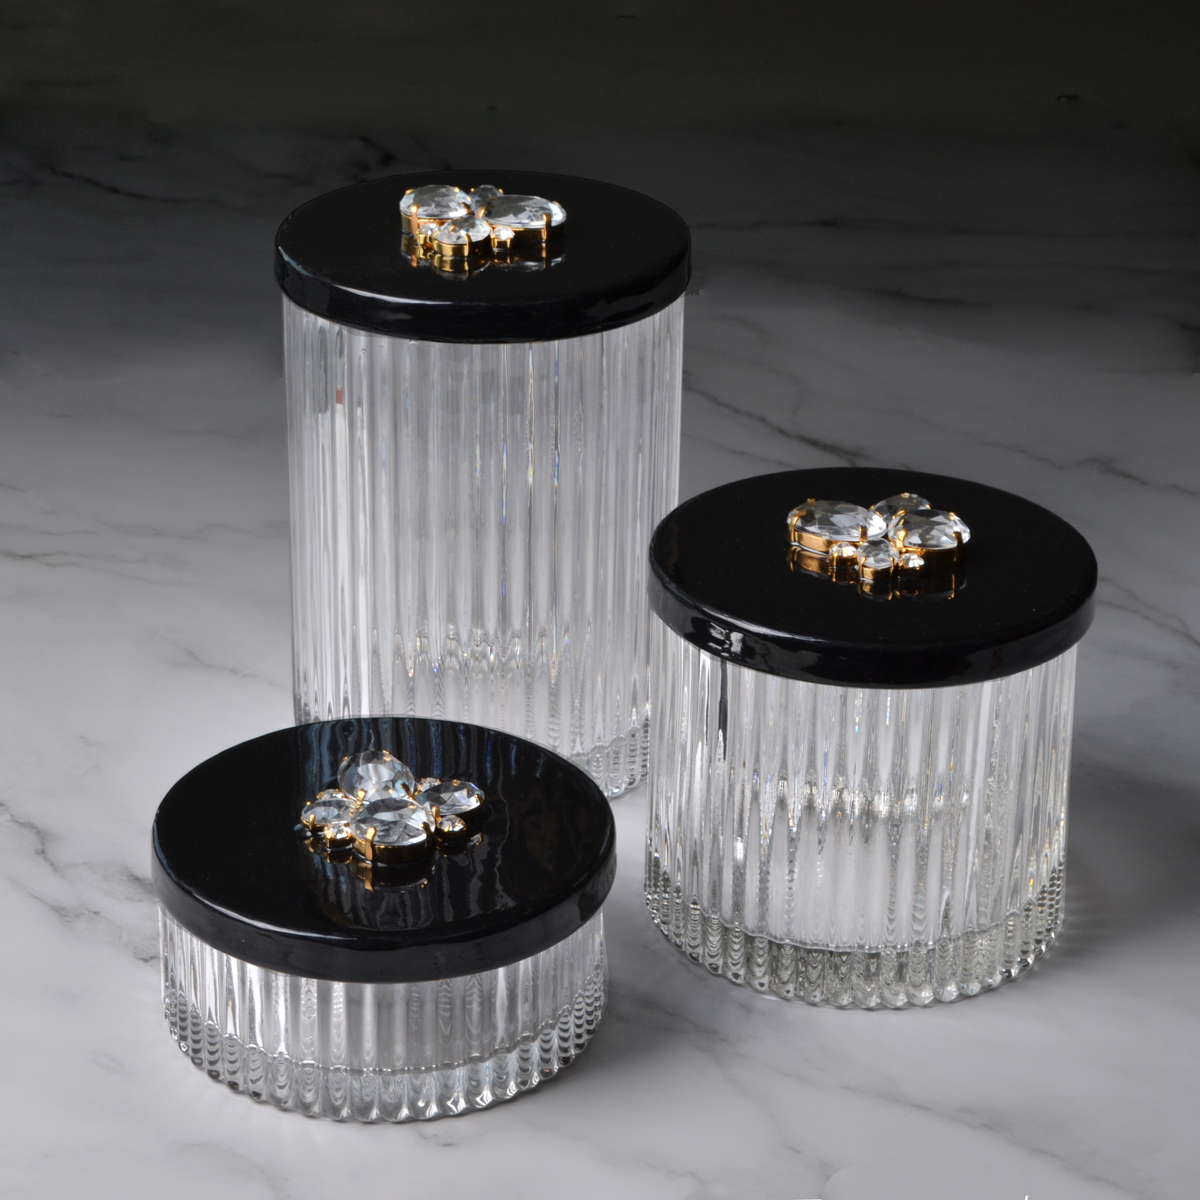 Topview of Mike and Ally Vanity Jars Black Enamel Set with Jewel Embellishment on Lid